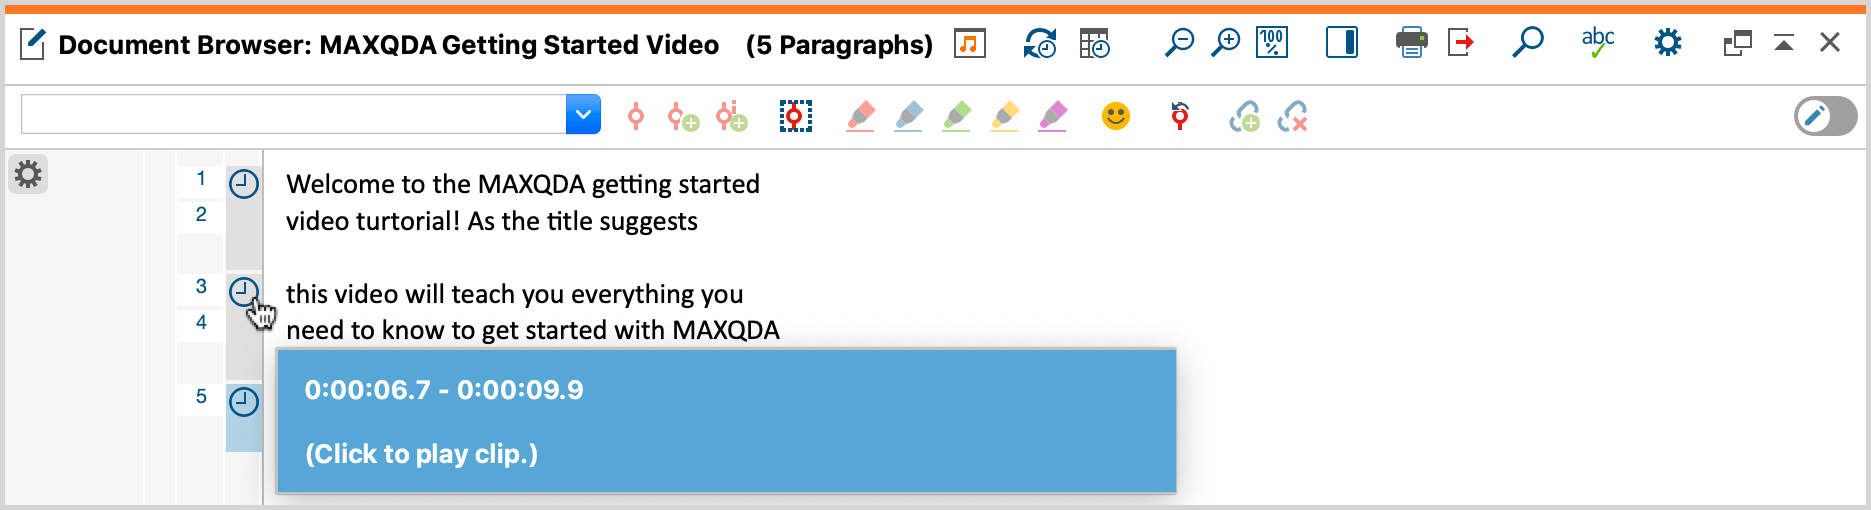 Imported SRT data in MAXQDA's “Document Browser“